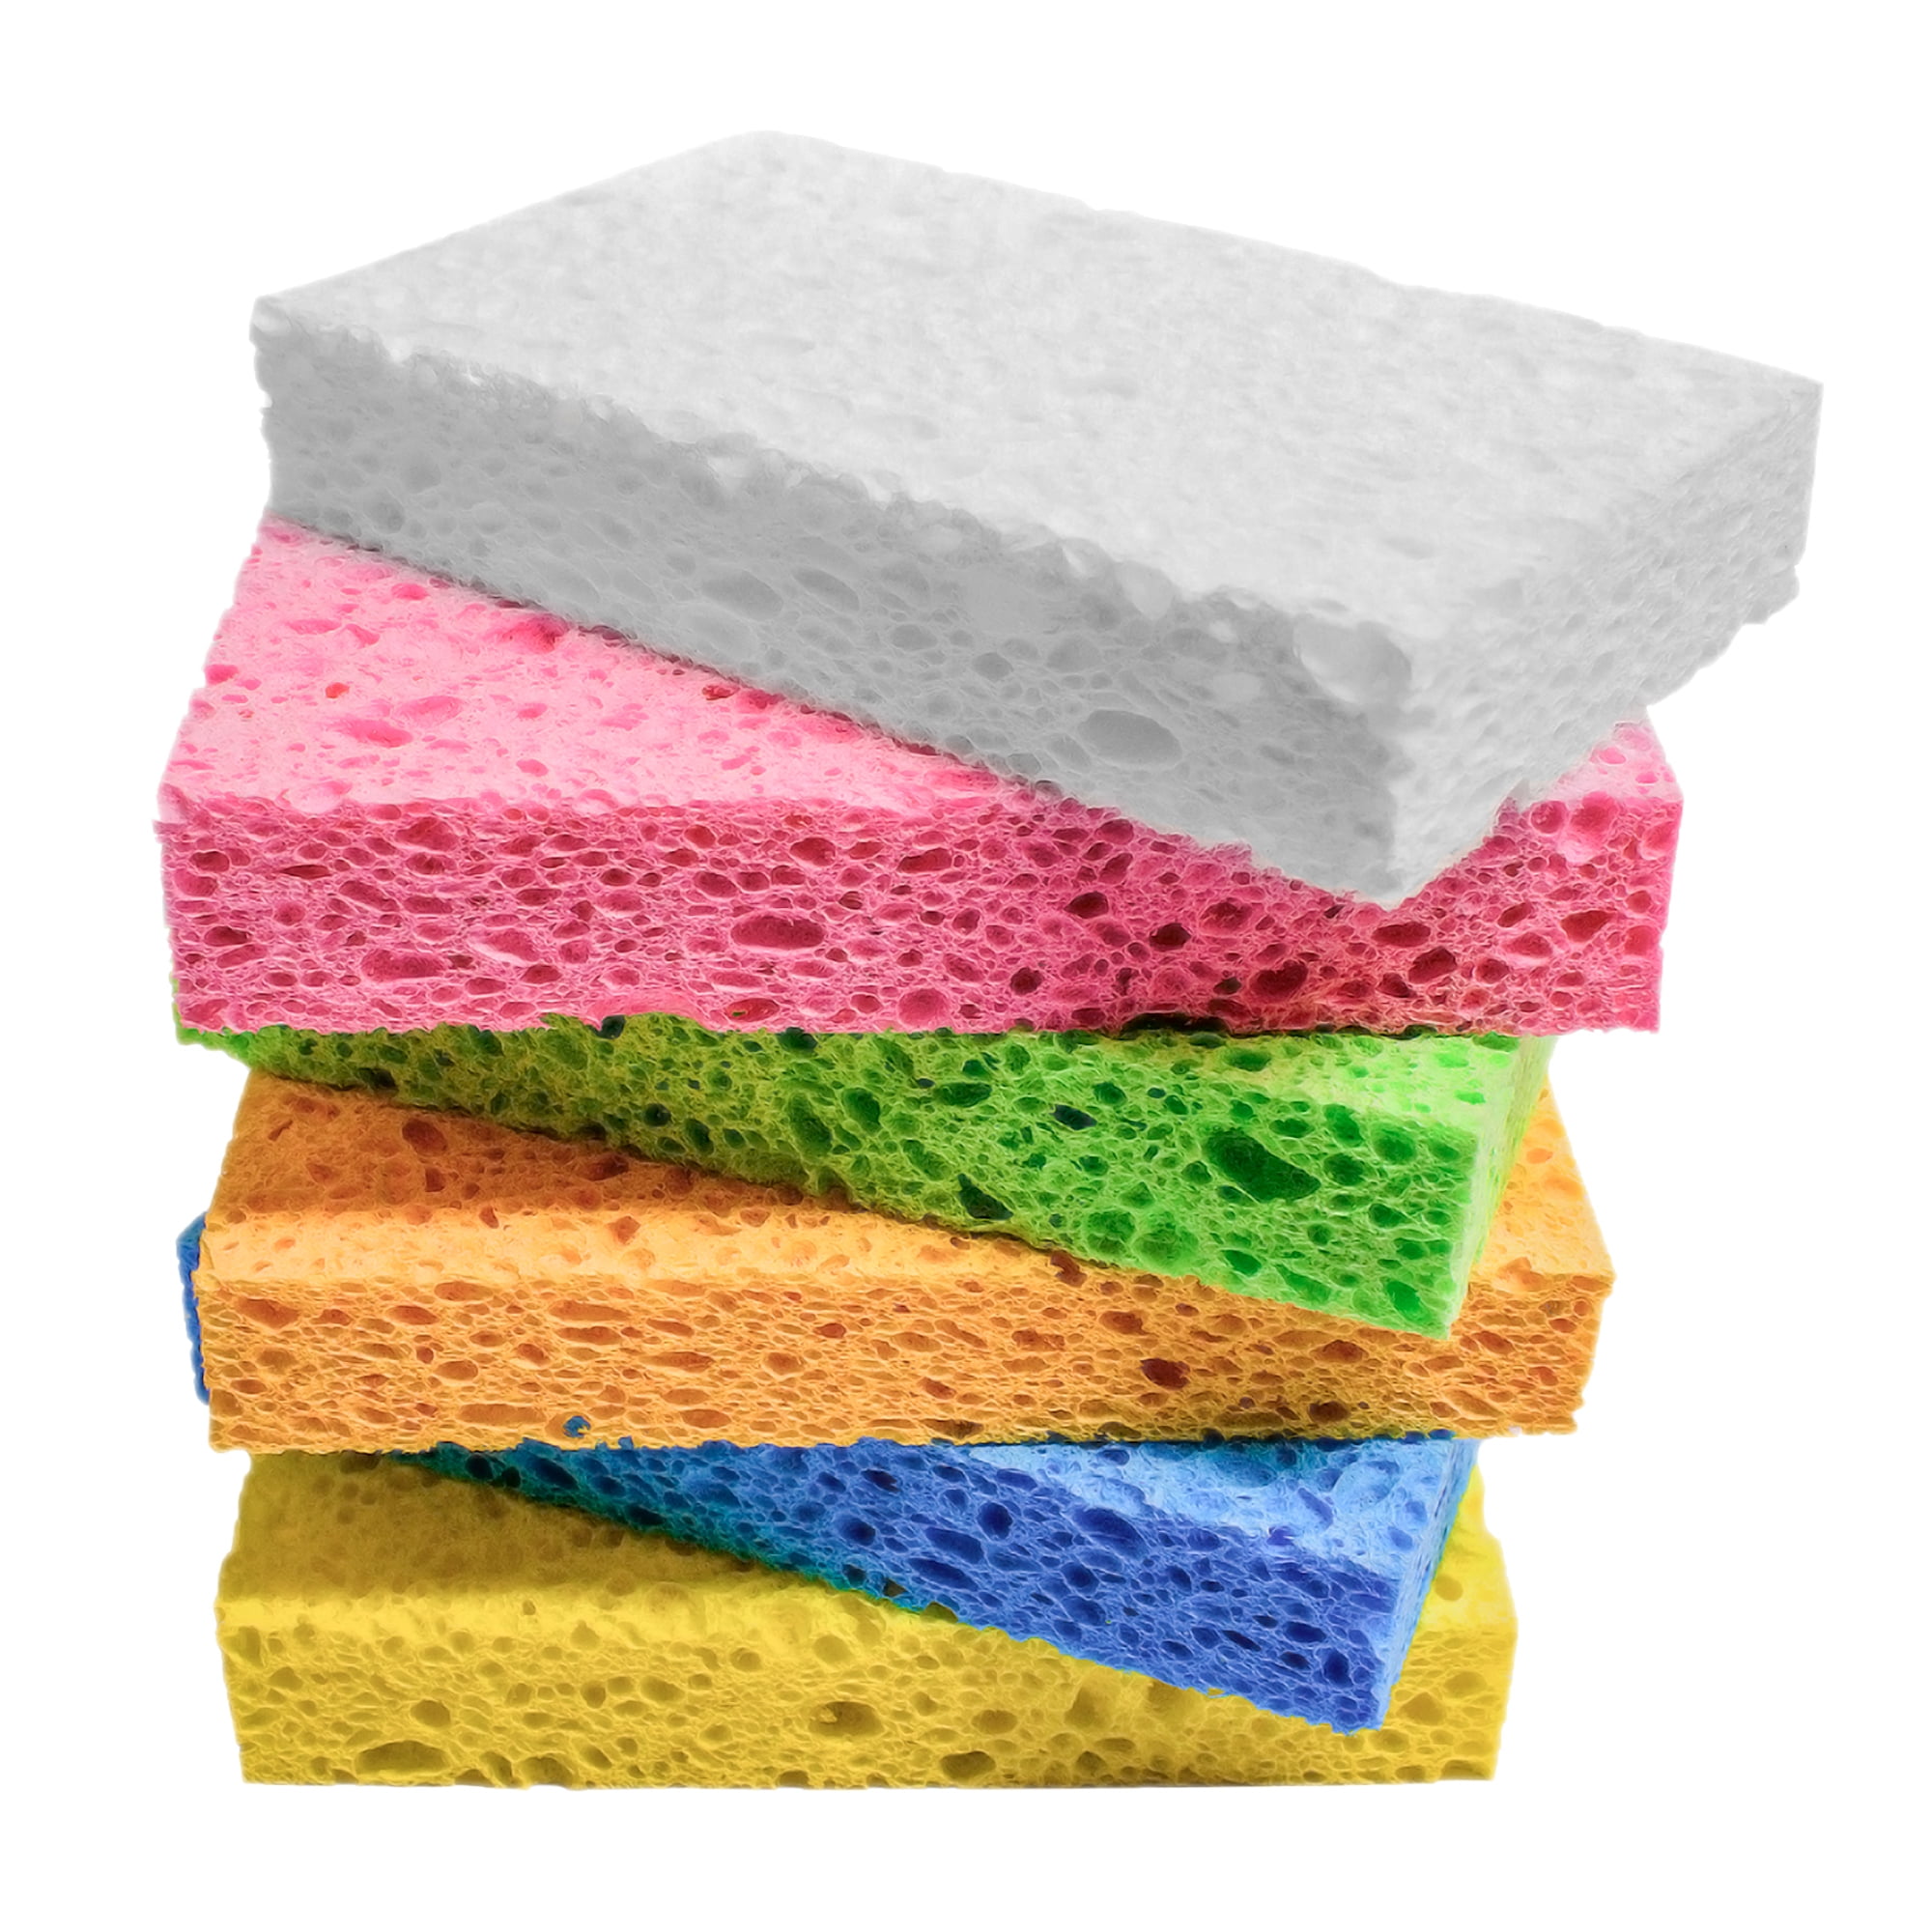 ARCLIBER Kitchen Sponges for Dishes Compressed Cellulose Sponge for Bathroom -6 Pack, Size: Compress size:4*2.4*0.1 inch,expand size:4.4*2.7*0.8 inch